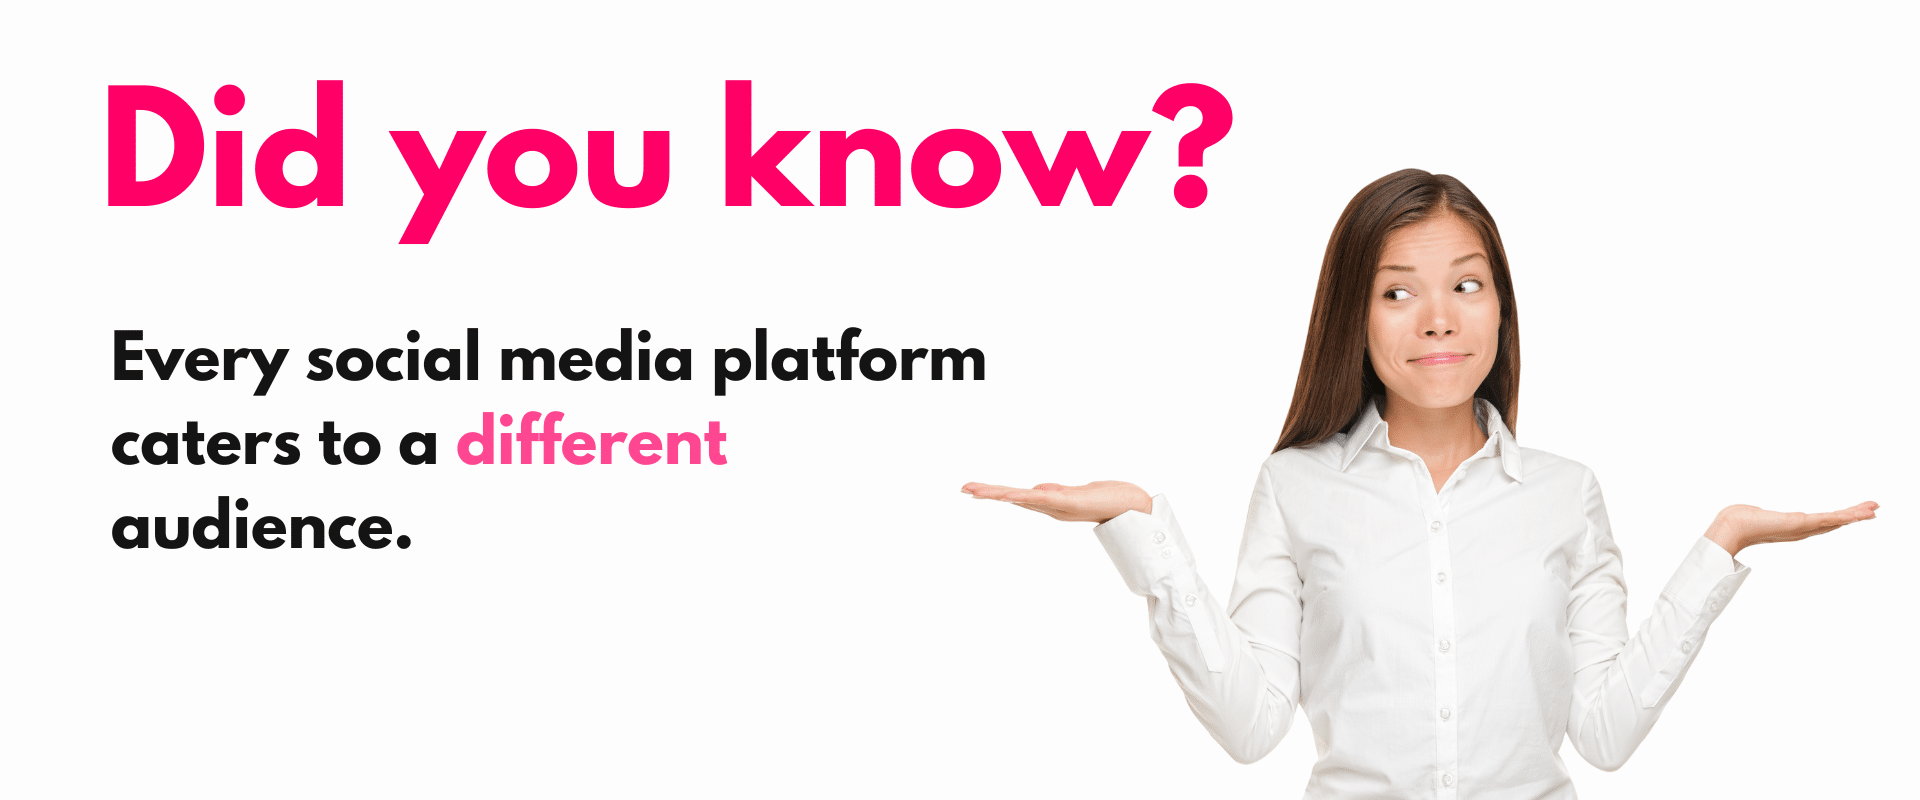 Every social media platform attracts a different audience.